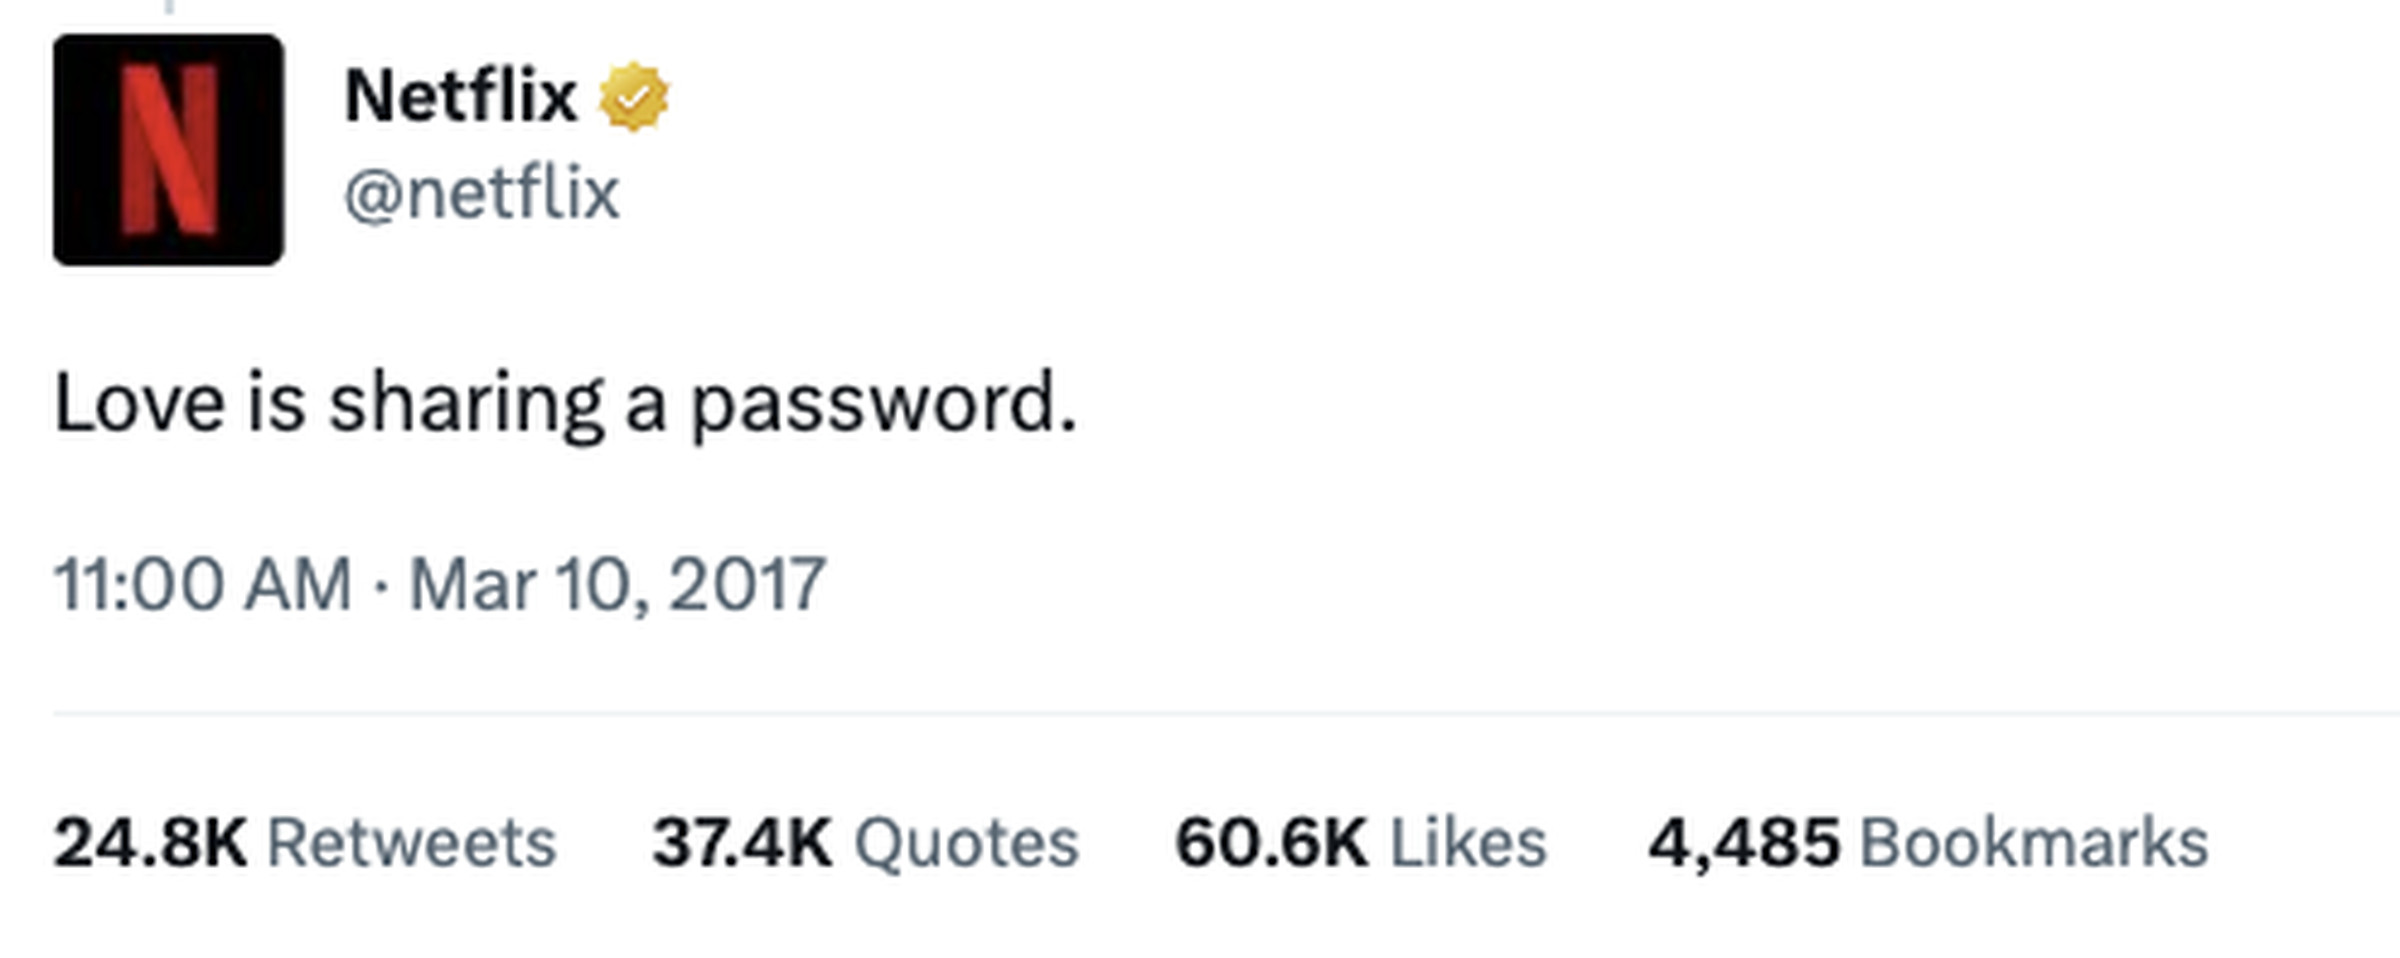 A March 10th, 2017, tweet from Netflix that reads, “Love is sharing a password.”